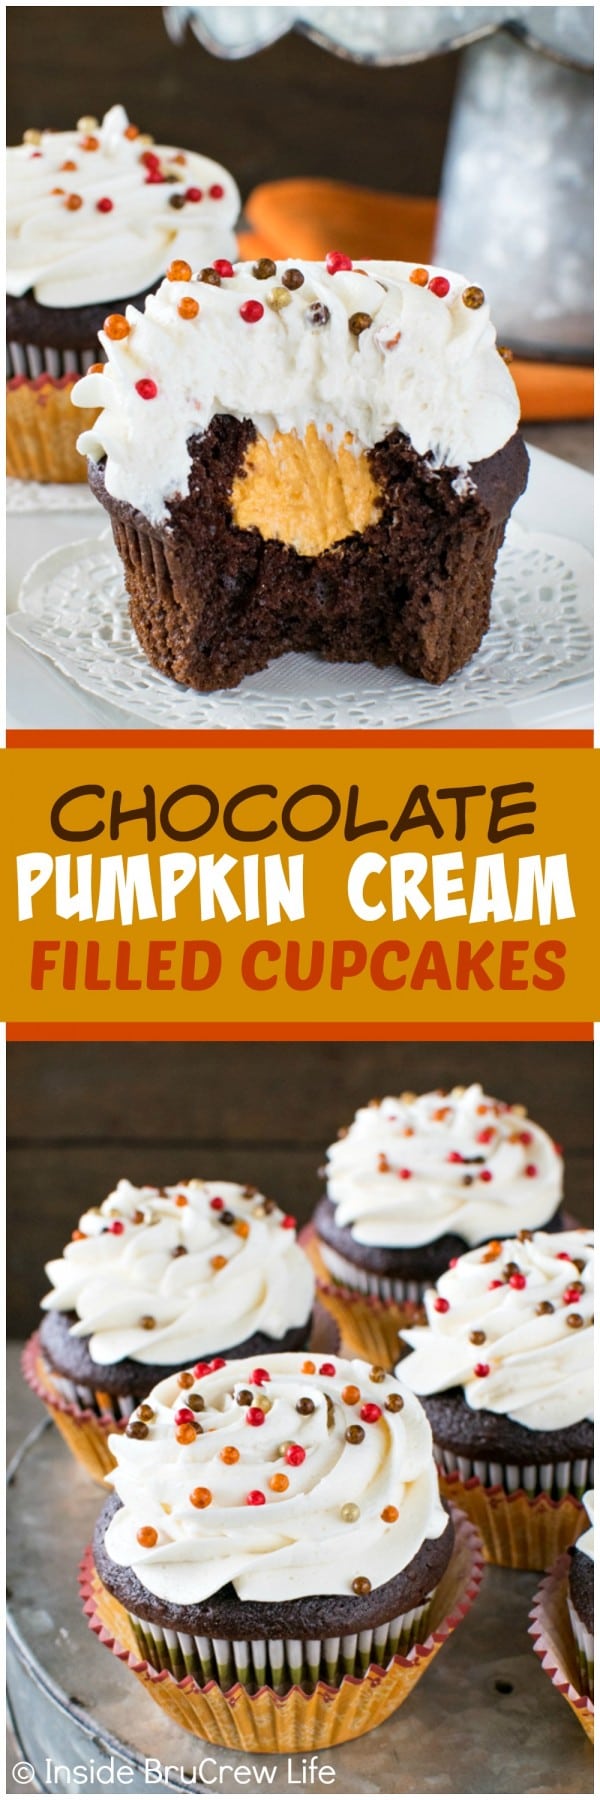 Chocolate Pumpkin Cream Filled Cupcakes - a hidden pumpkin cream center makes these chocolate cupcakes a fun recipe to share at fall parties